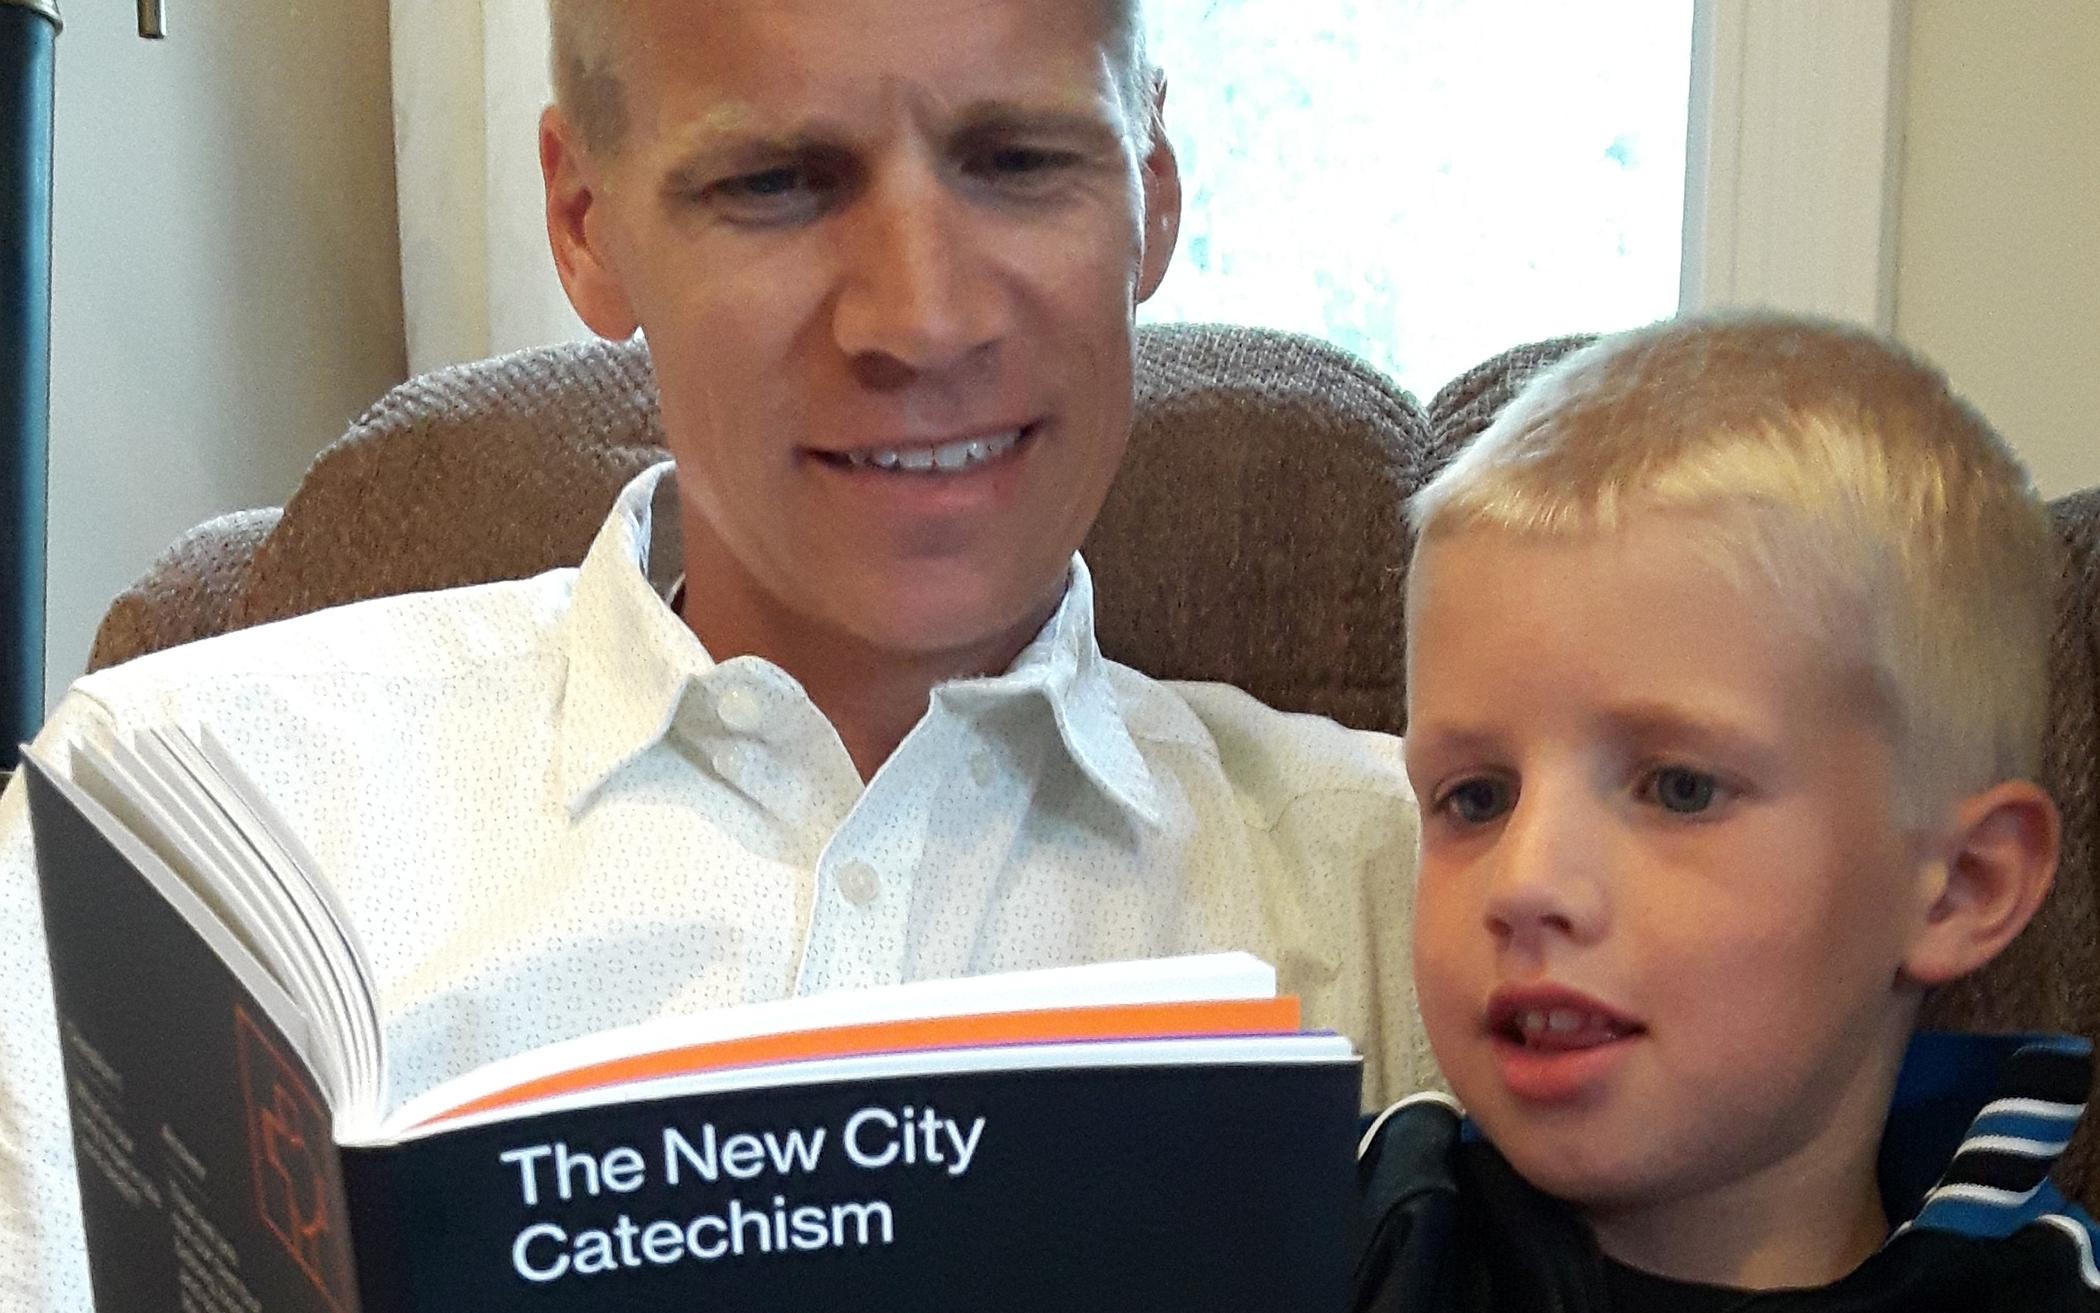 Varying Views on The New City Catechism